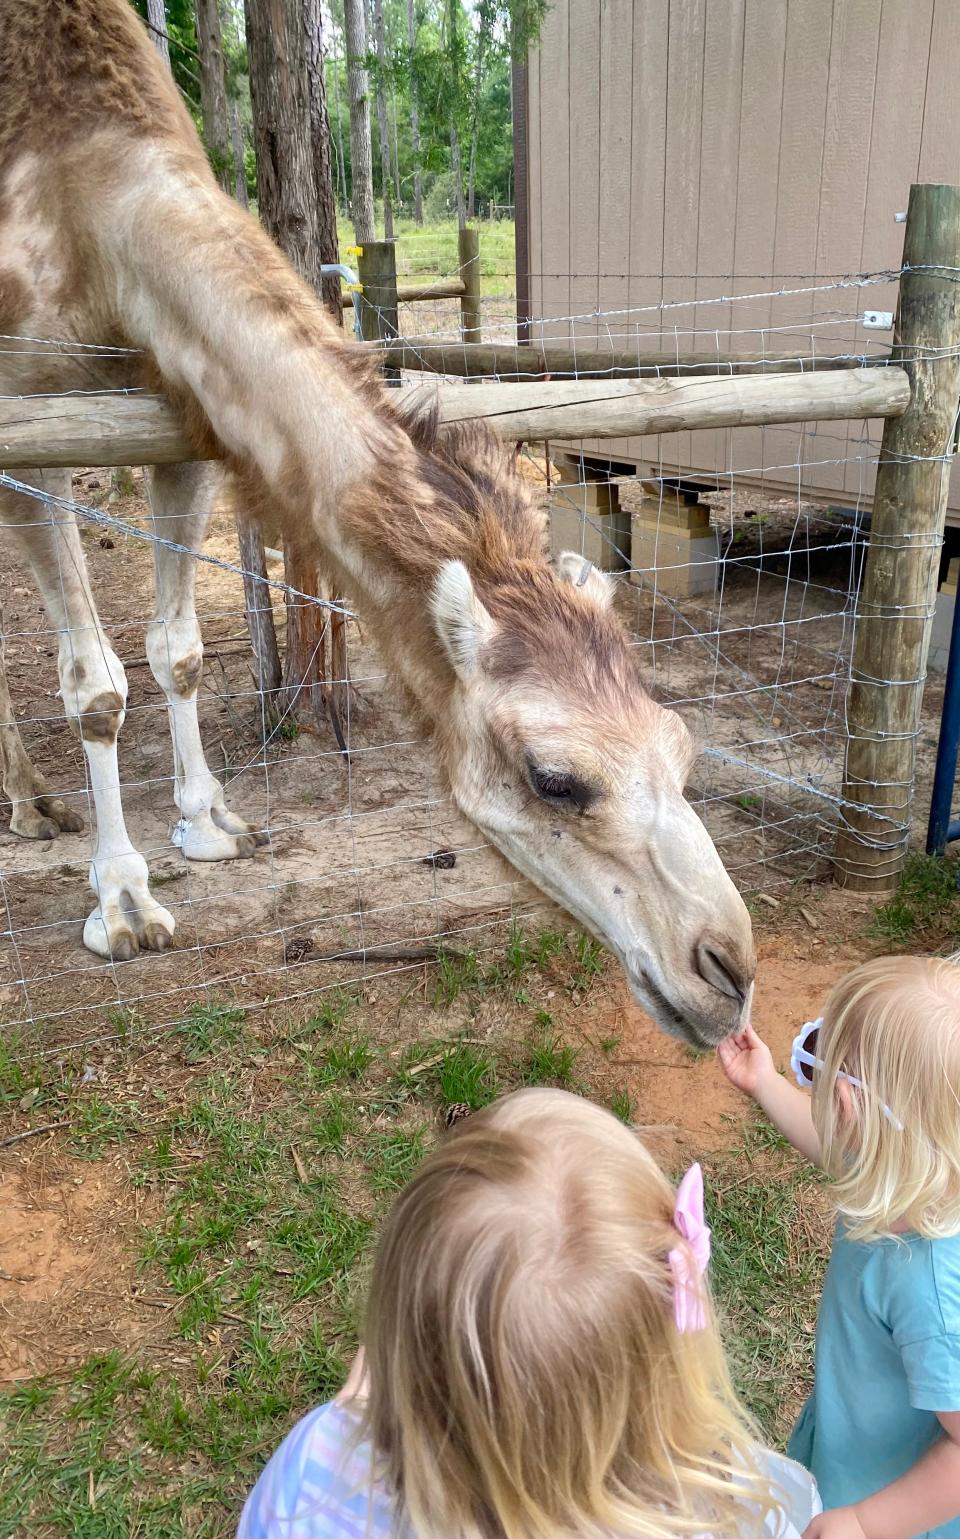 Children participating in a kick-off event for the Elba Library summer reading program feed Claude the camel at Marley Acres in Elba, Alabama, on June 3, 2023.